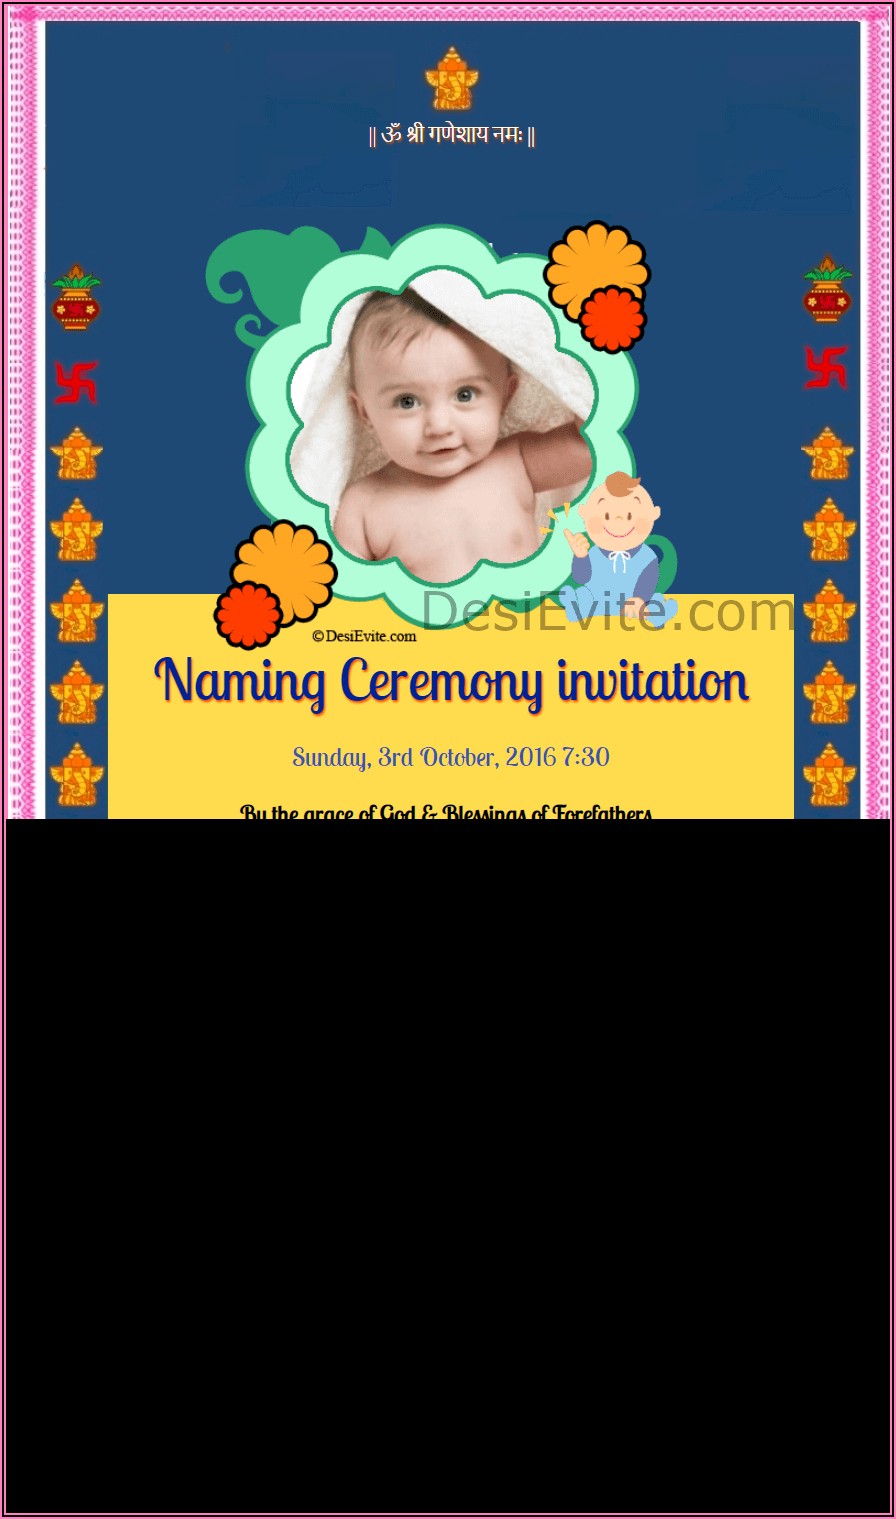 Naming Ceremony Invitation Cards Online Free Download